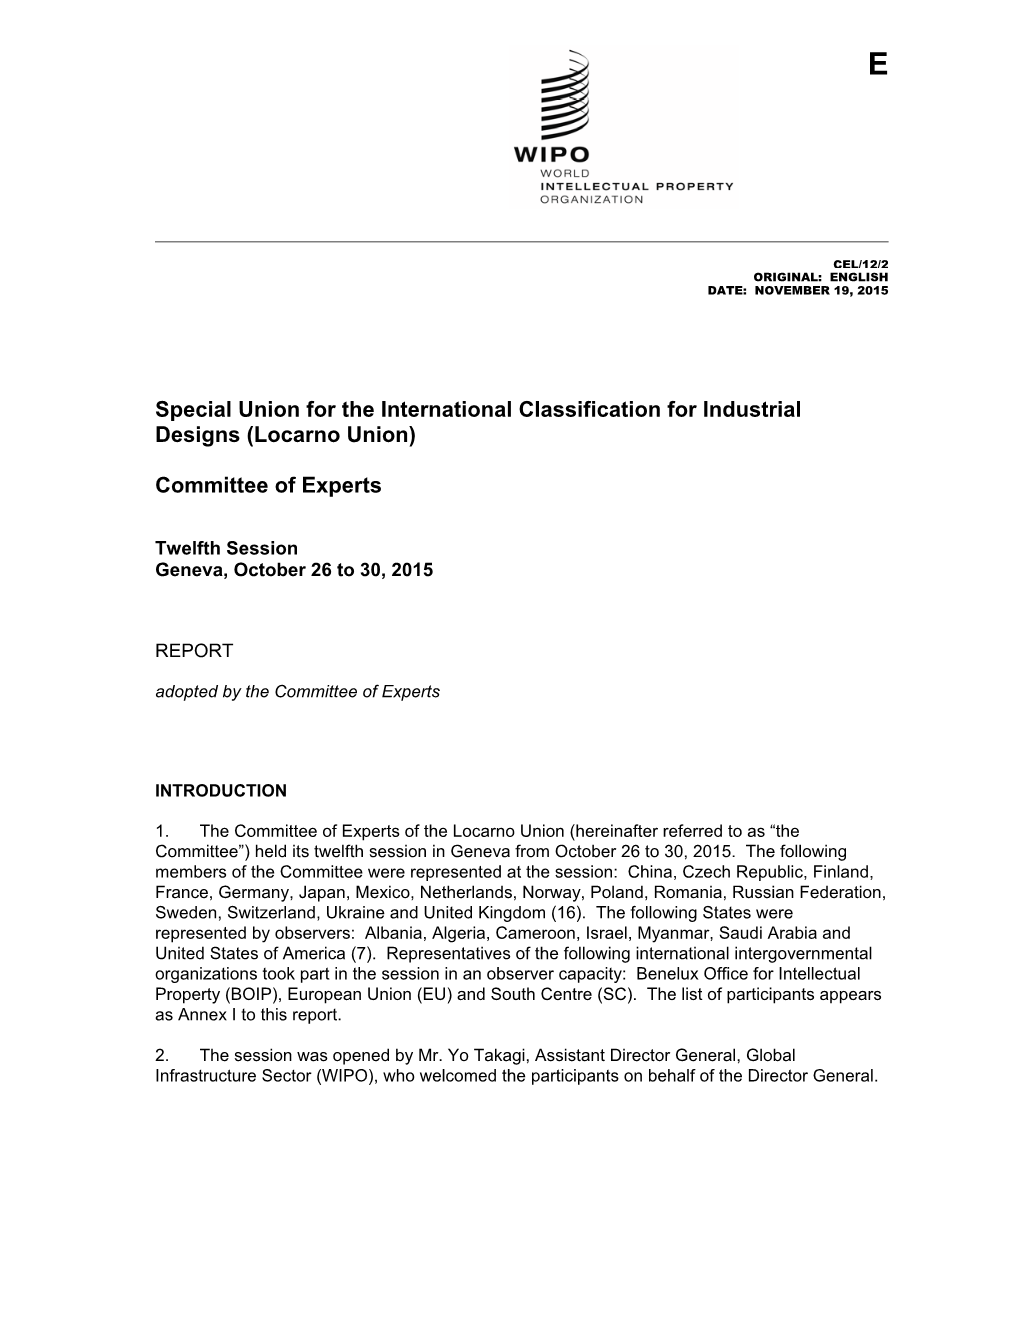 Special Union for the International Classification for Industrial Designs (Locarno Union)